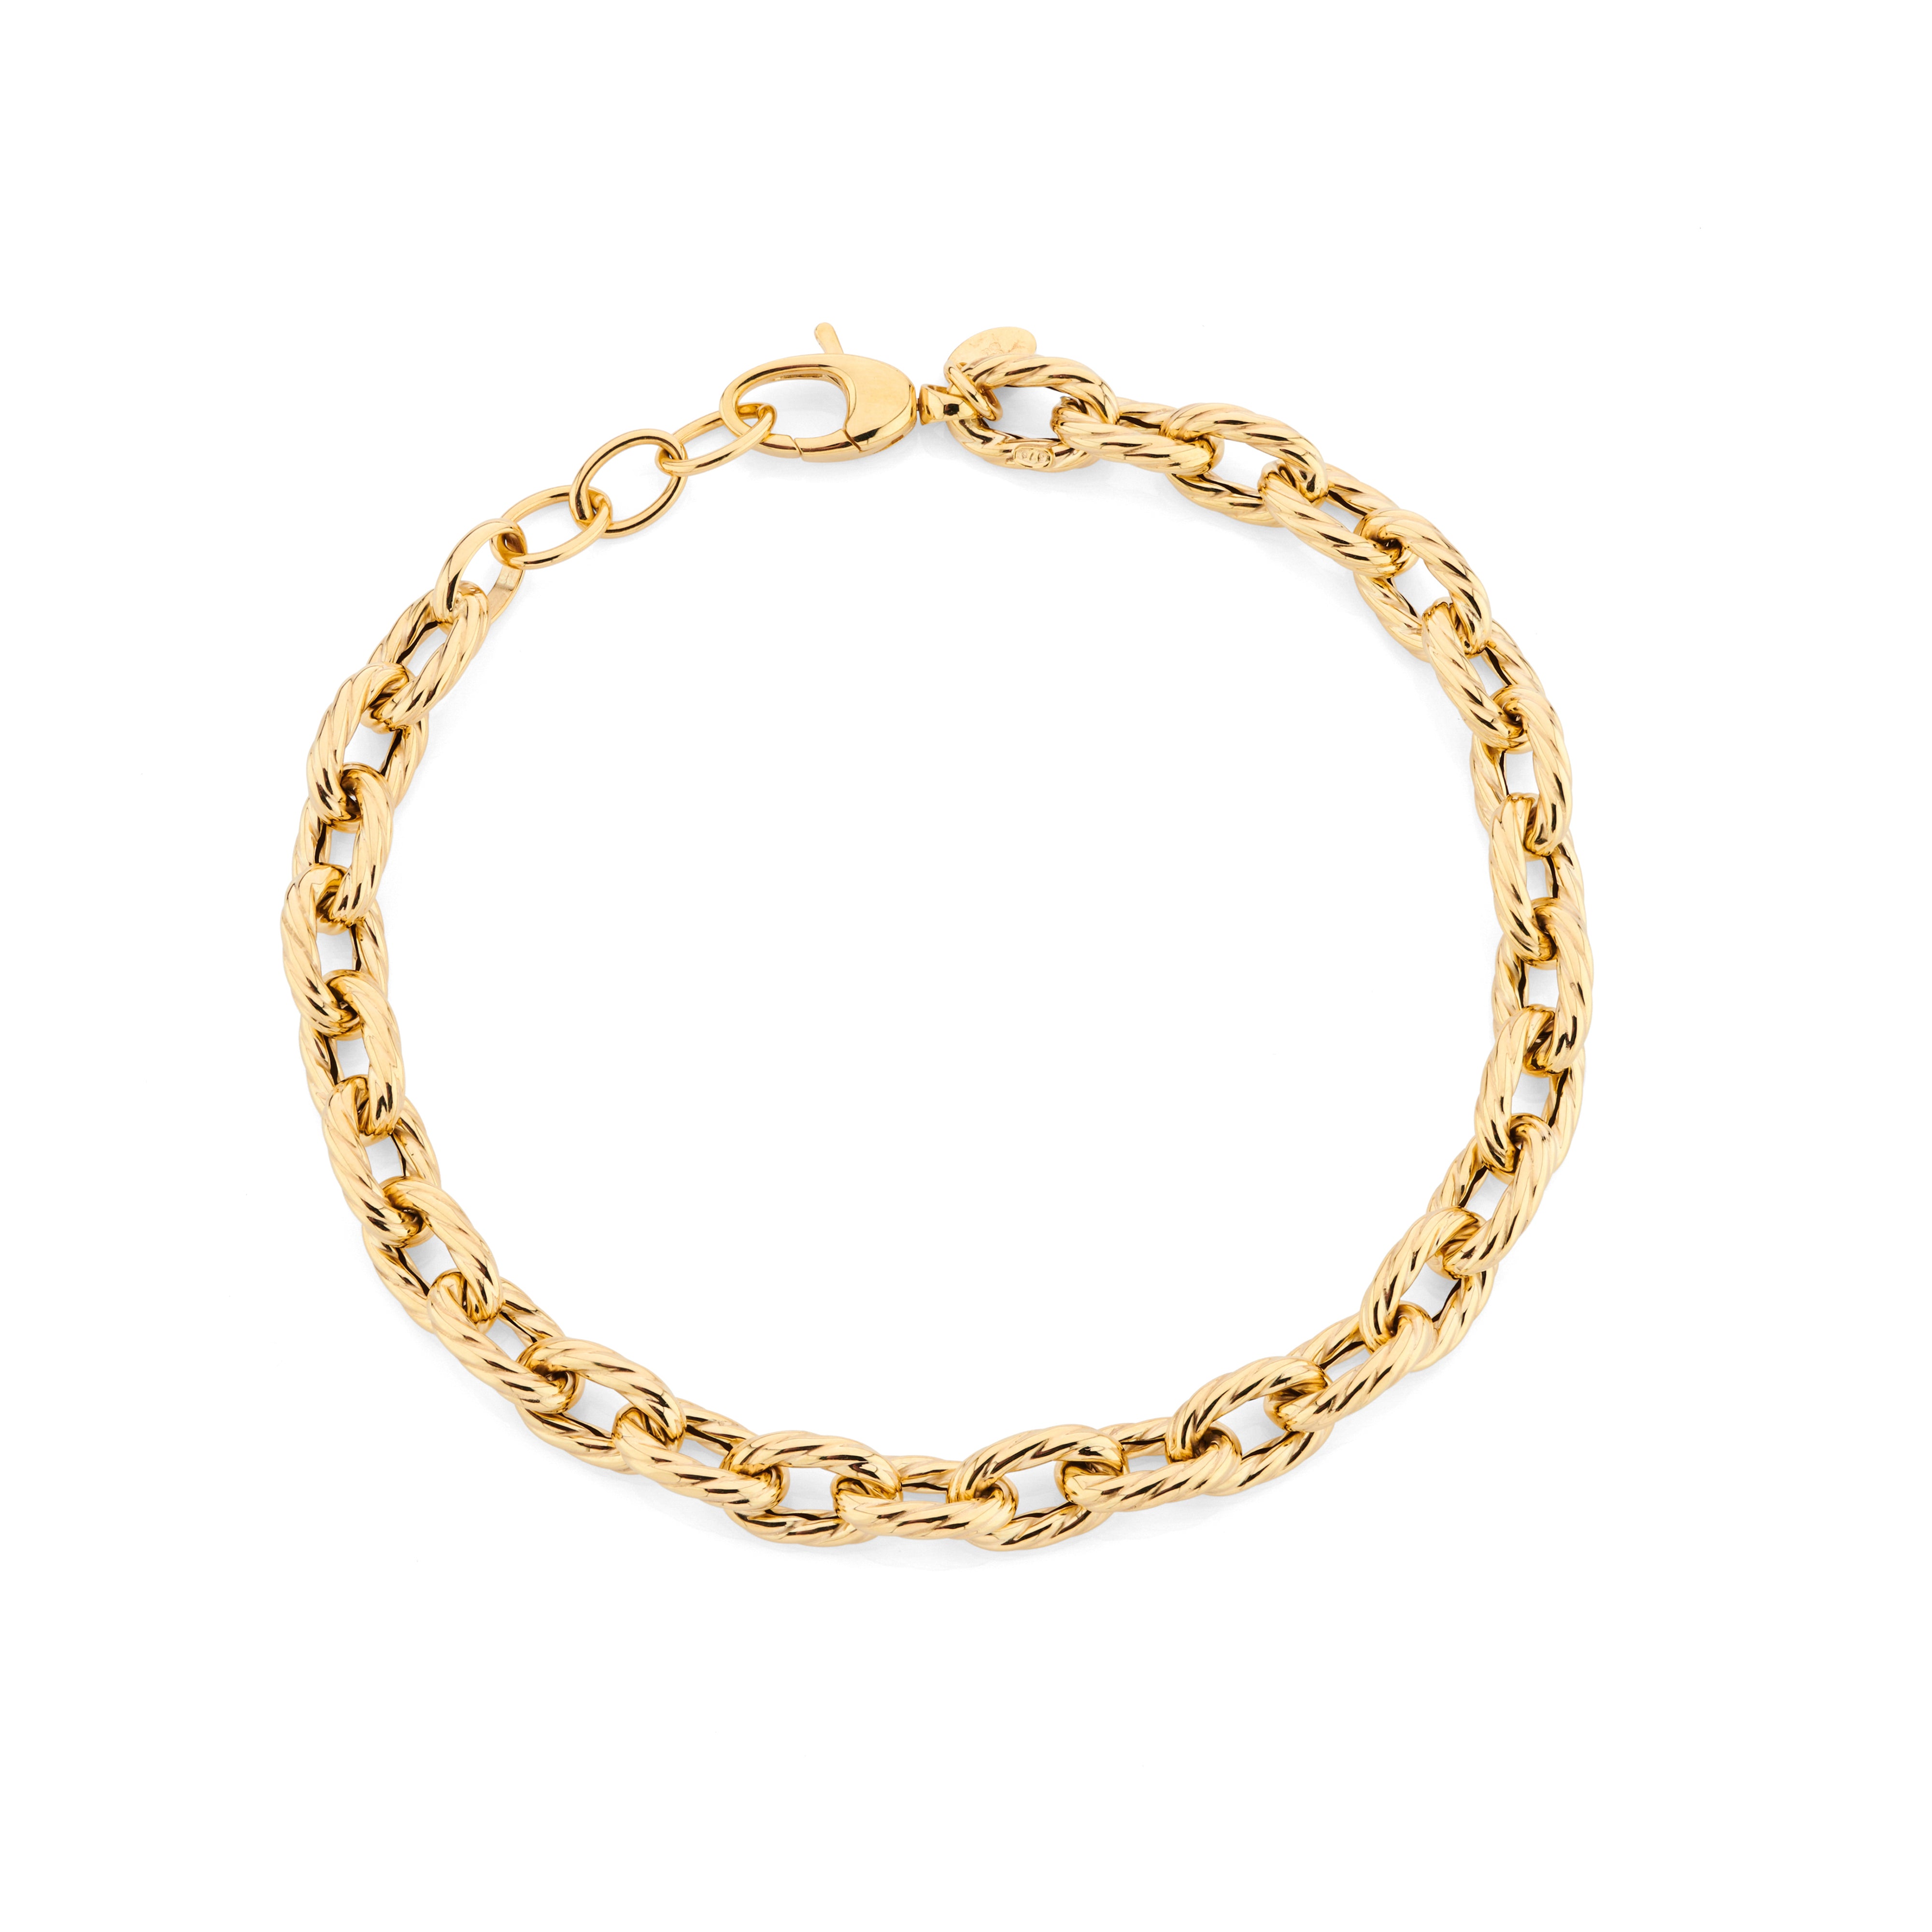 YELLOW GOLD ROPE STYLE BRACELET